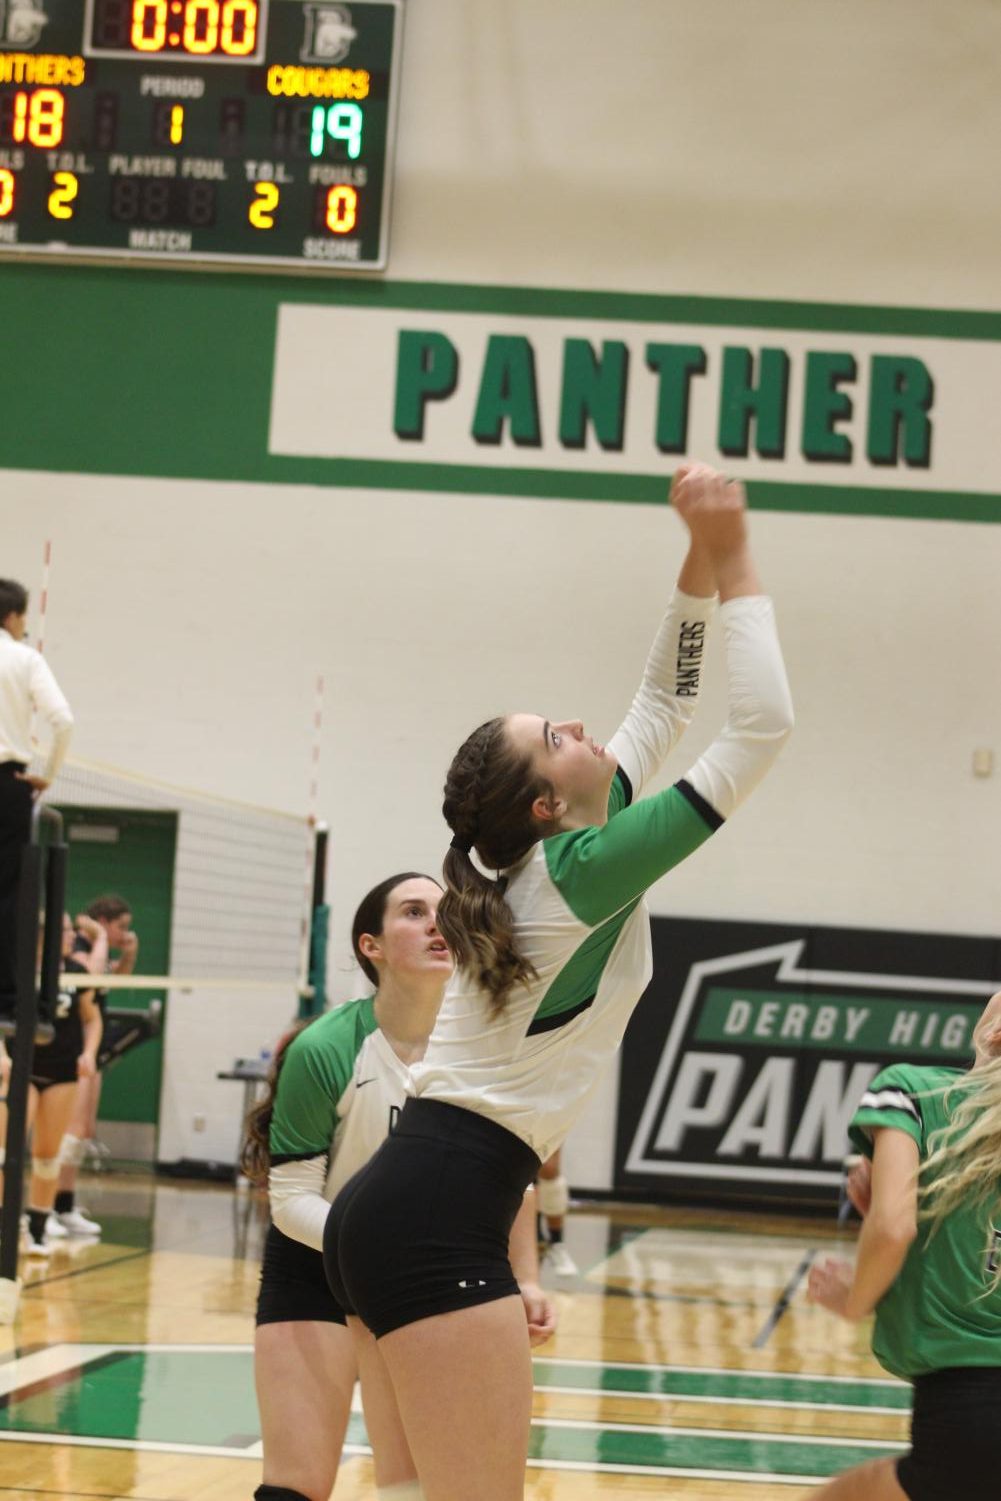 Volleyball+game+Vs.+South+%28Photos+by+Laurisa+Rooney%29